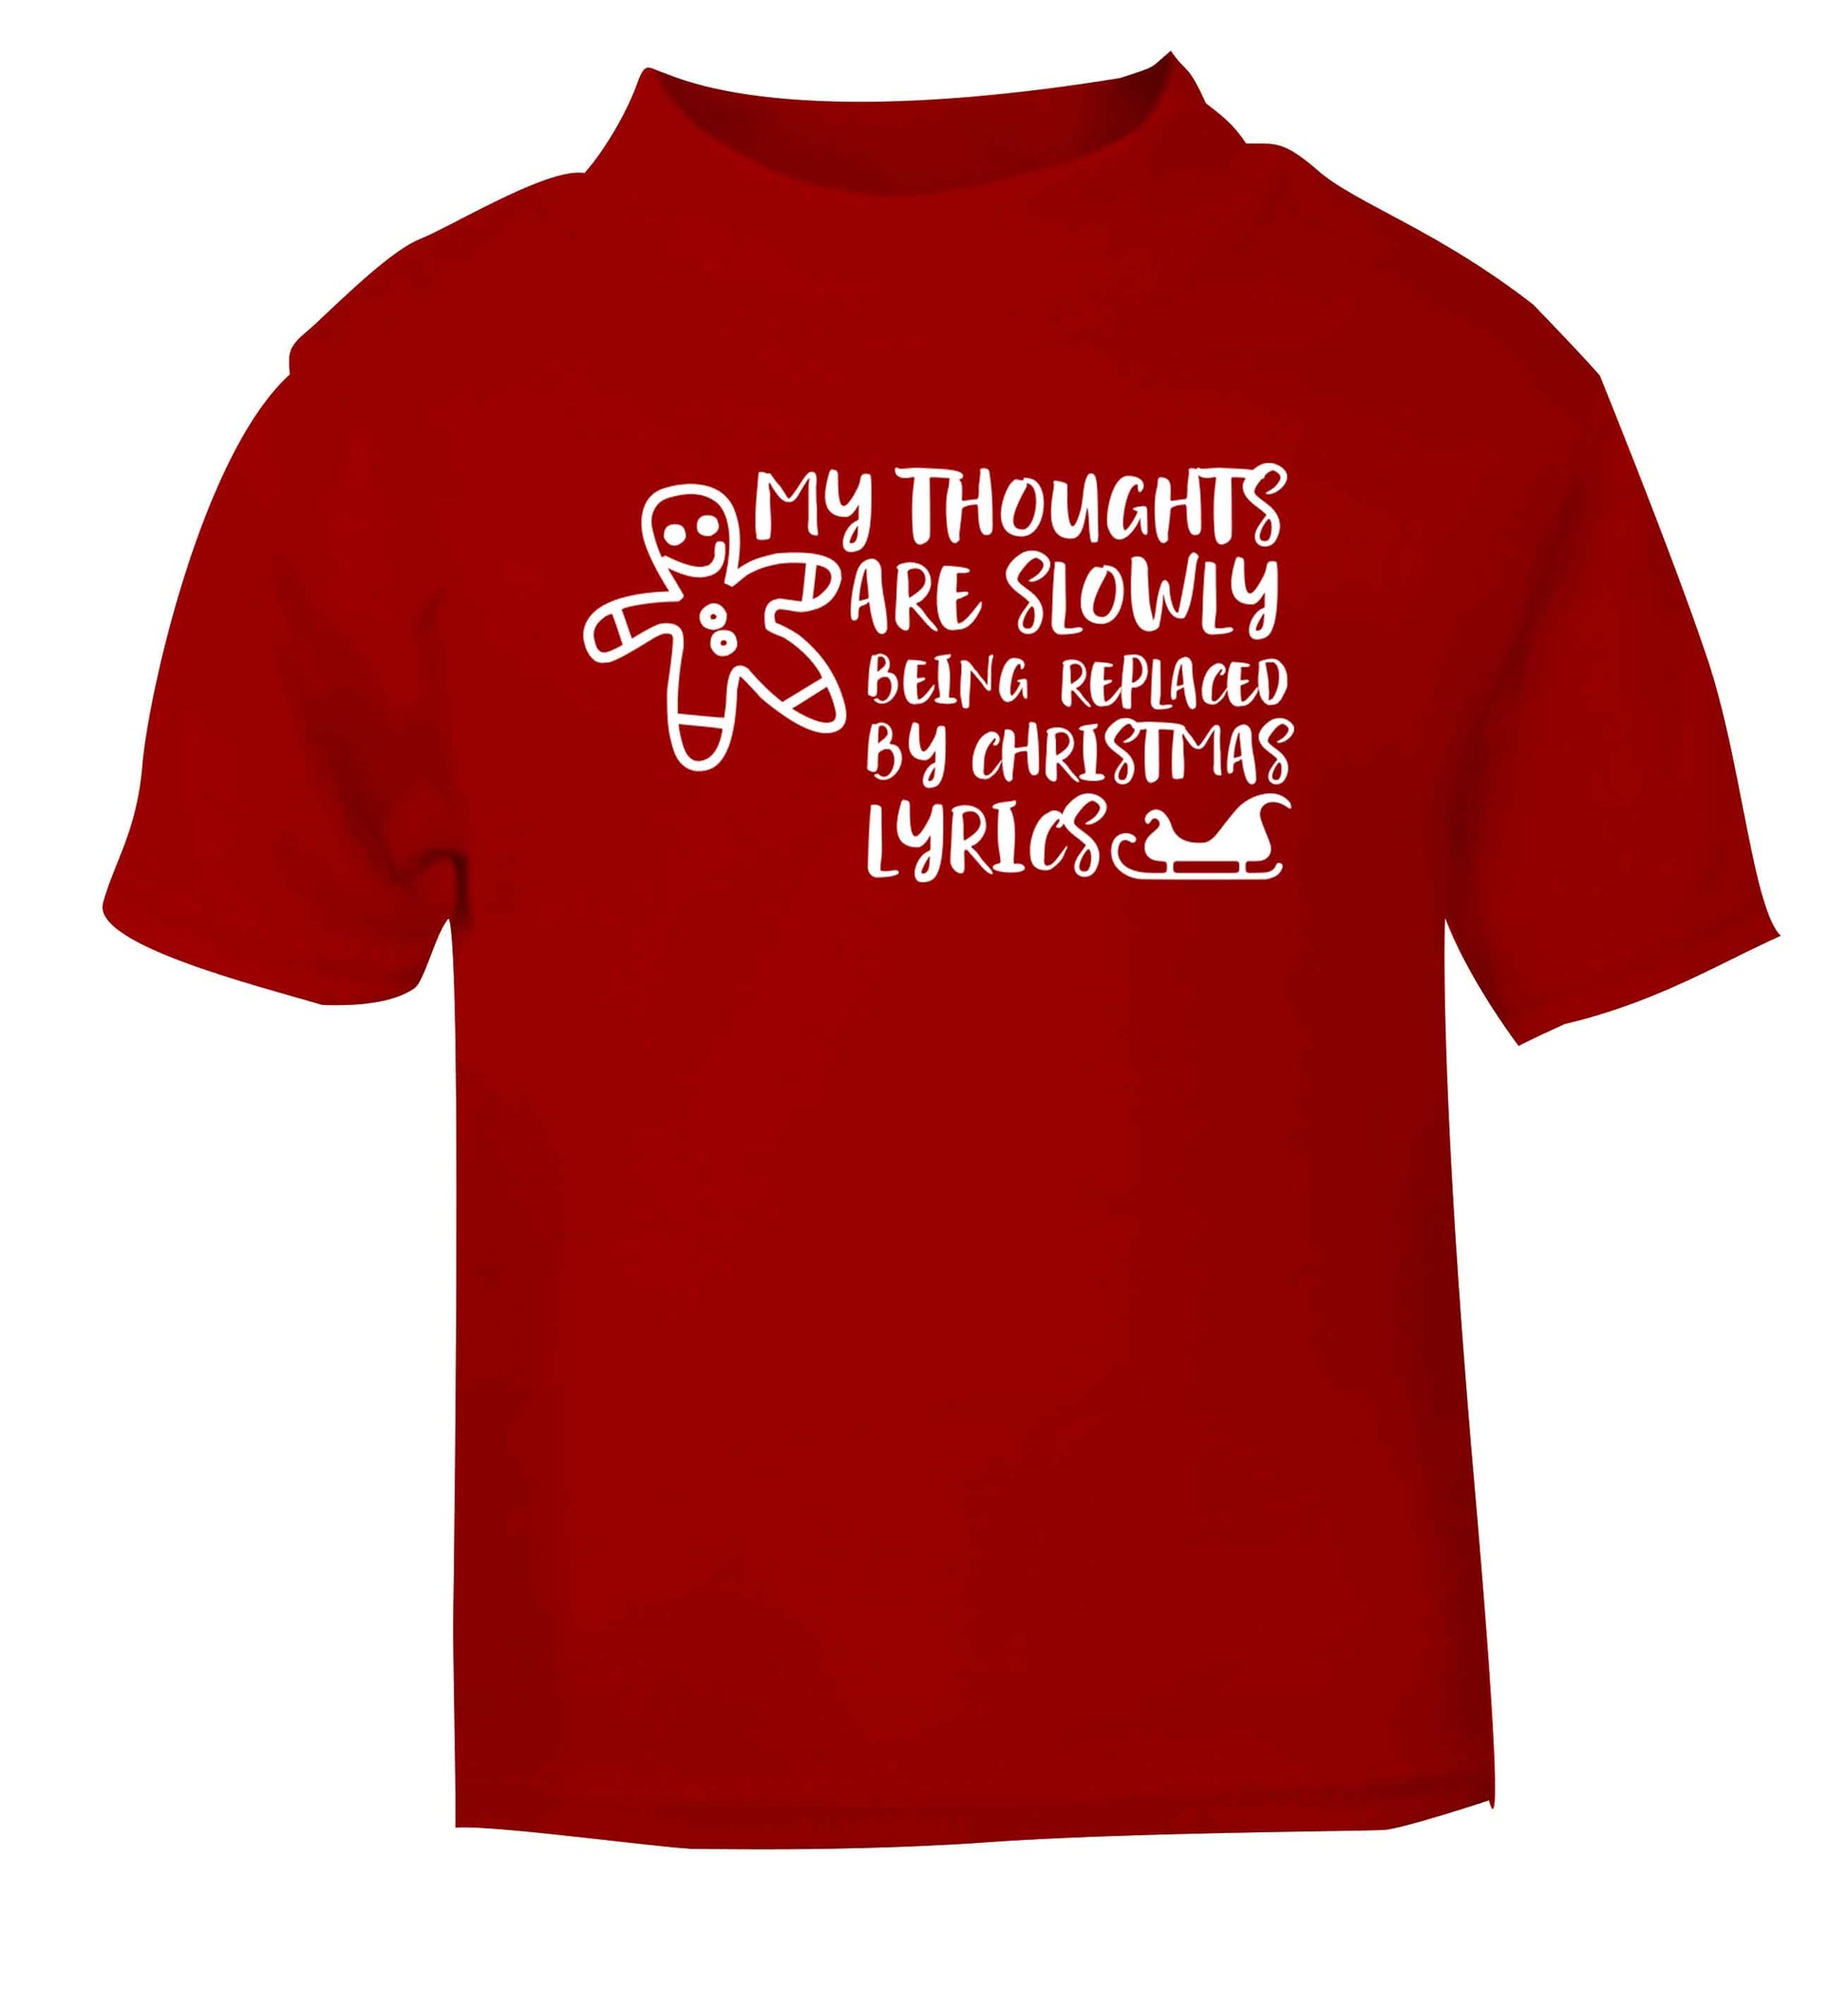 My thoughts are slowly being replaced by Christmas lyrics red Baby Toddler Tshirt 2 Years